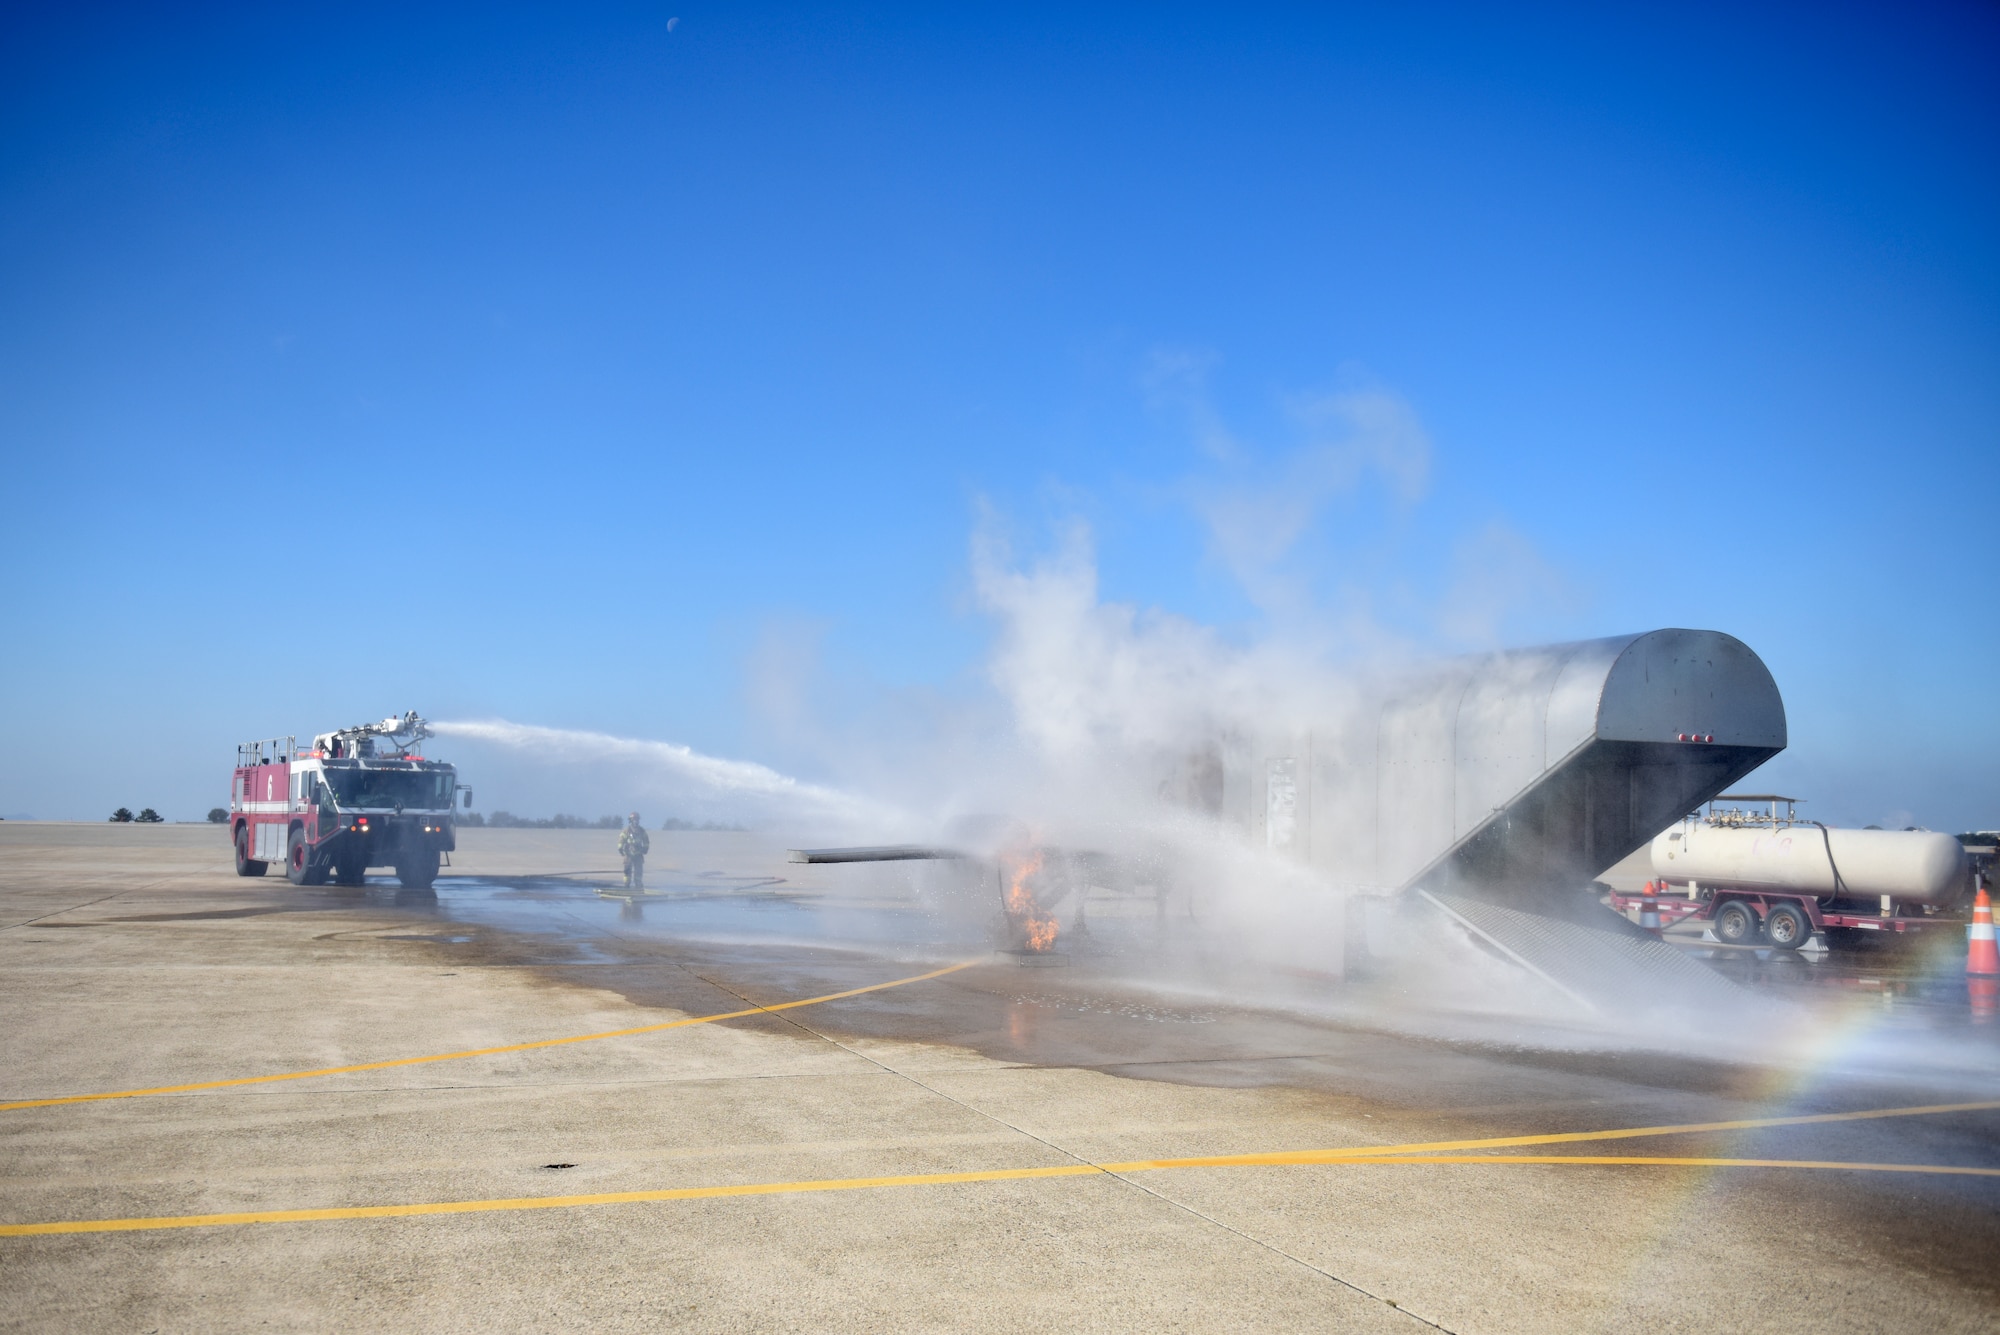 U.S. Air Force firefighters assigned to the 8th Civil Engineer Squadron conduct live aircraft fire training at Kunsan Air Base, Republic of Korea, Nov. 20, 2019. The training helps firefighters and trainers gain experience while also building cohesiveness within their team. (U.S. Air Force photo by Staff Sgt. Mackenzie Mendez)